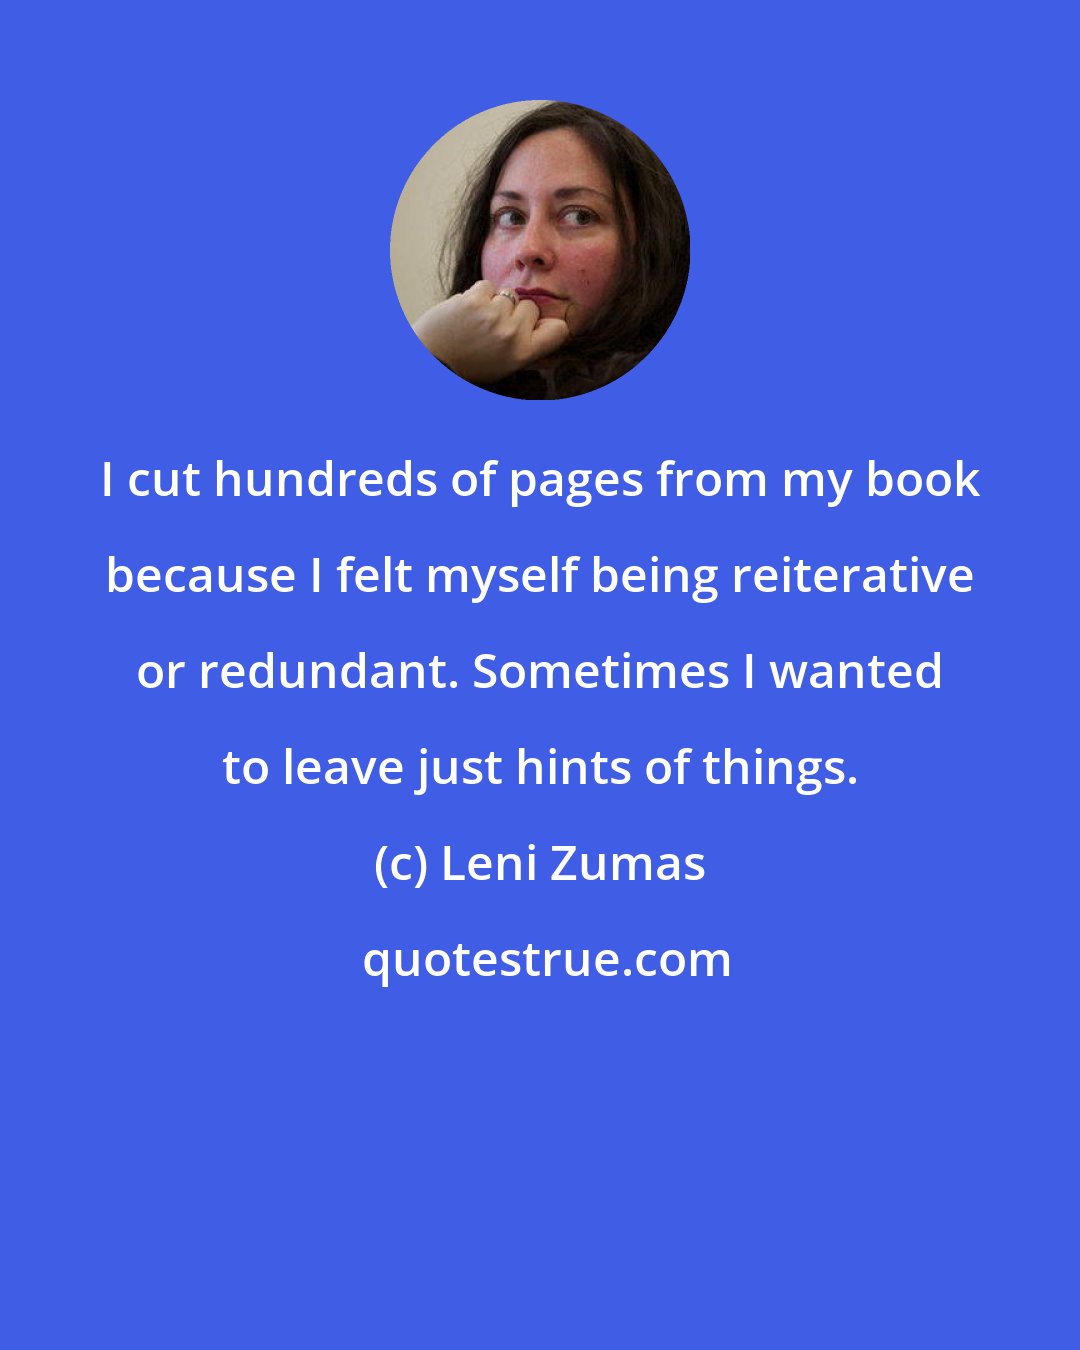 Leni Zumas: I cut hundreds of pages from my book because I felt myself being reiterative or redundant. Sometimes I wanted to leave just hints of things.